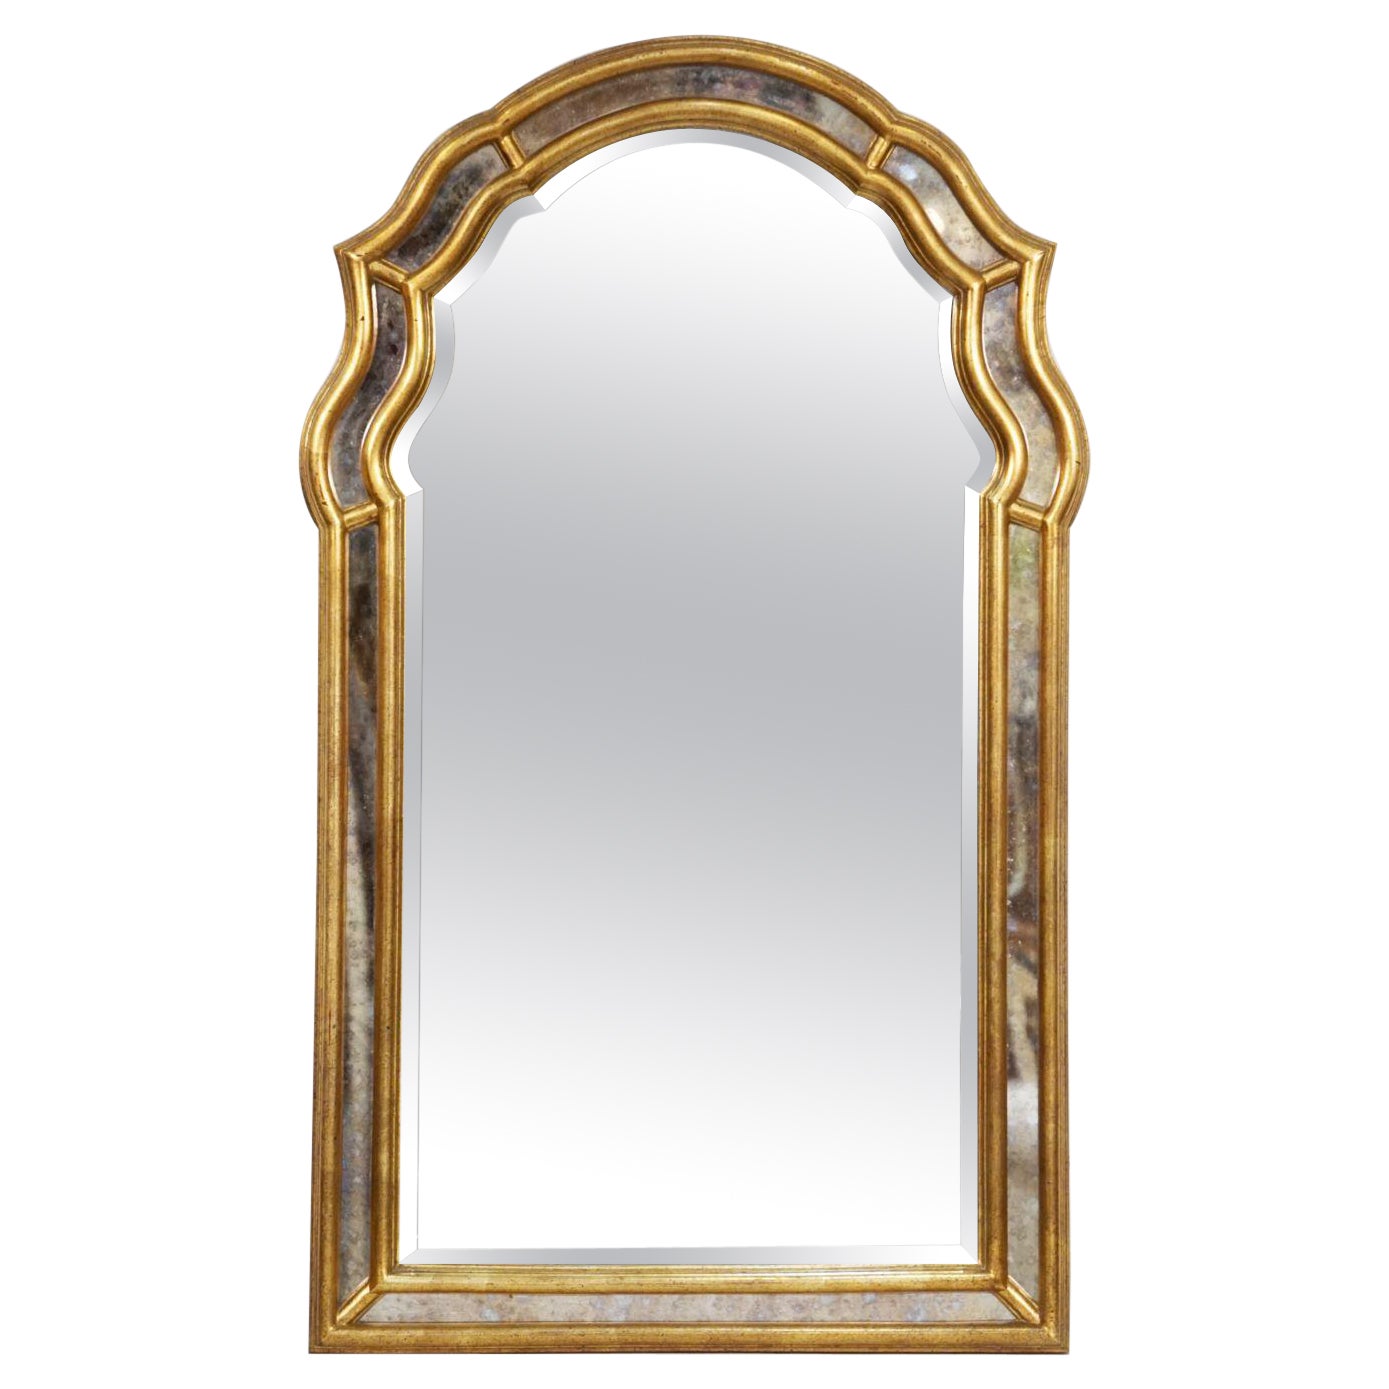 Large French Arch-Top Gilt Wall Mirror (H 45 1/2 x W 27 1/2)